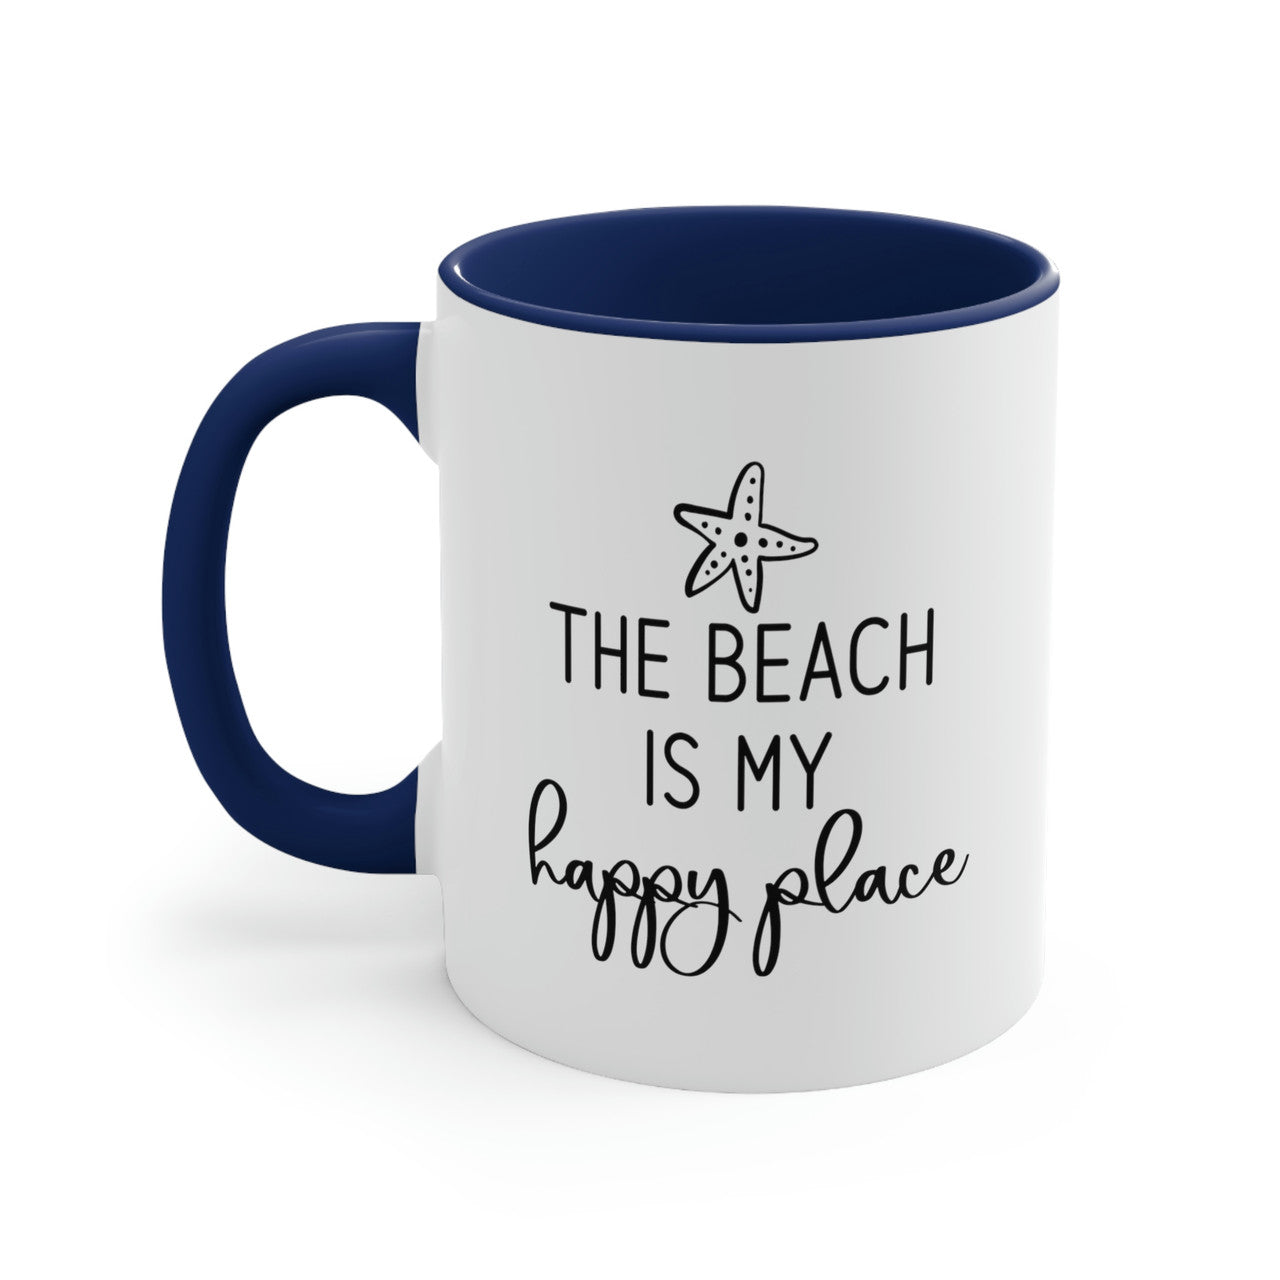 The Beach Is My Happy Place Ceramic Coffee Mug, 5 Colors Mugs New England Trading Co Navy  